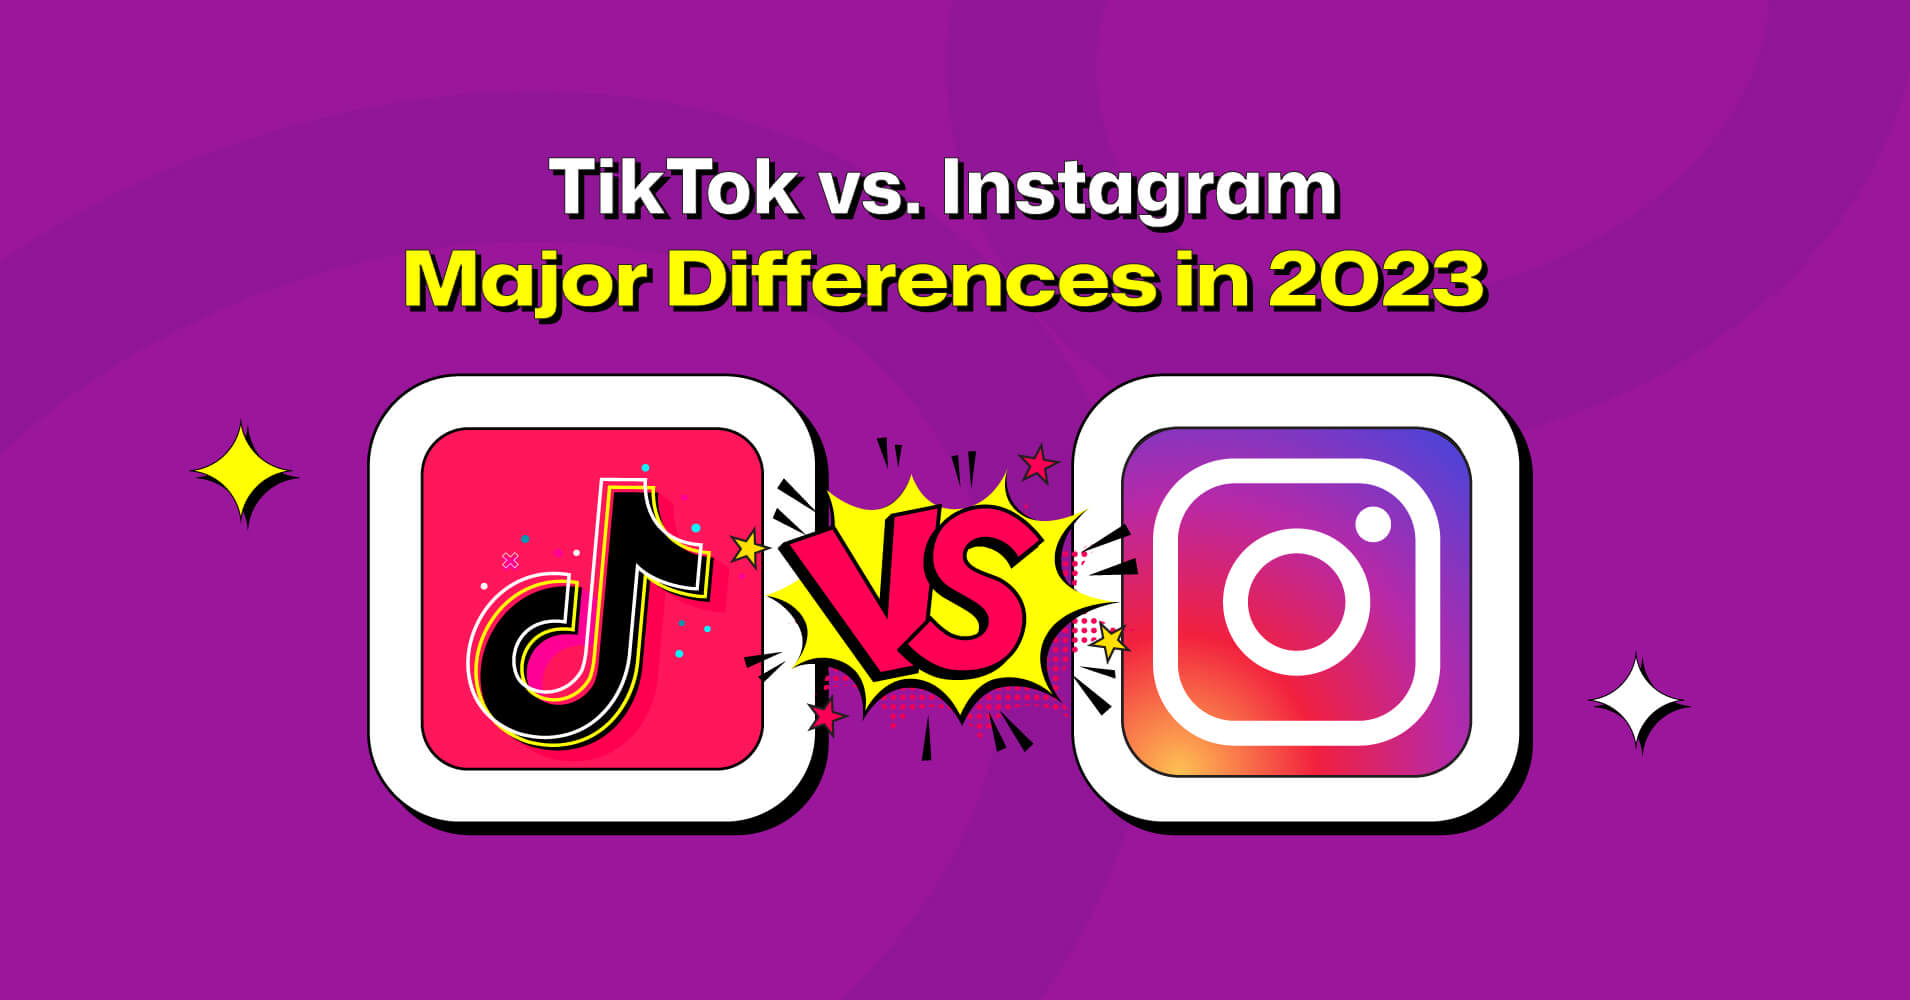 TikTok vs. Instagram battle started with the growth of TikTok's popularity and Instagram launching reels, a similar feature.